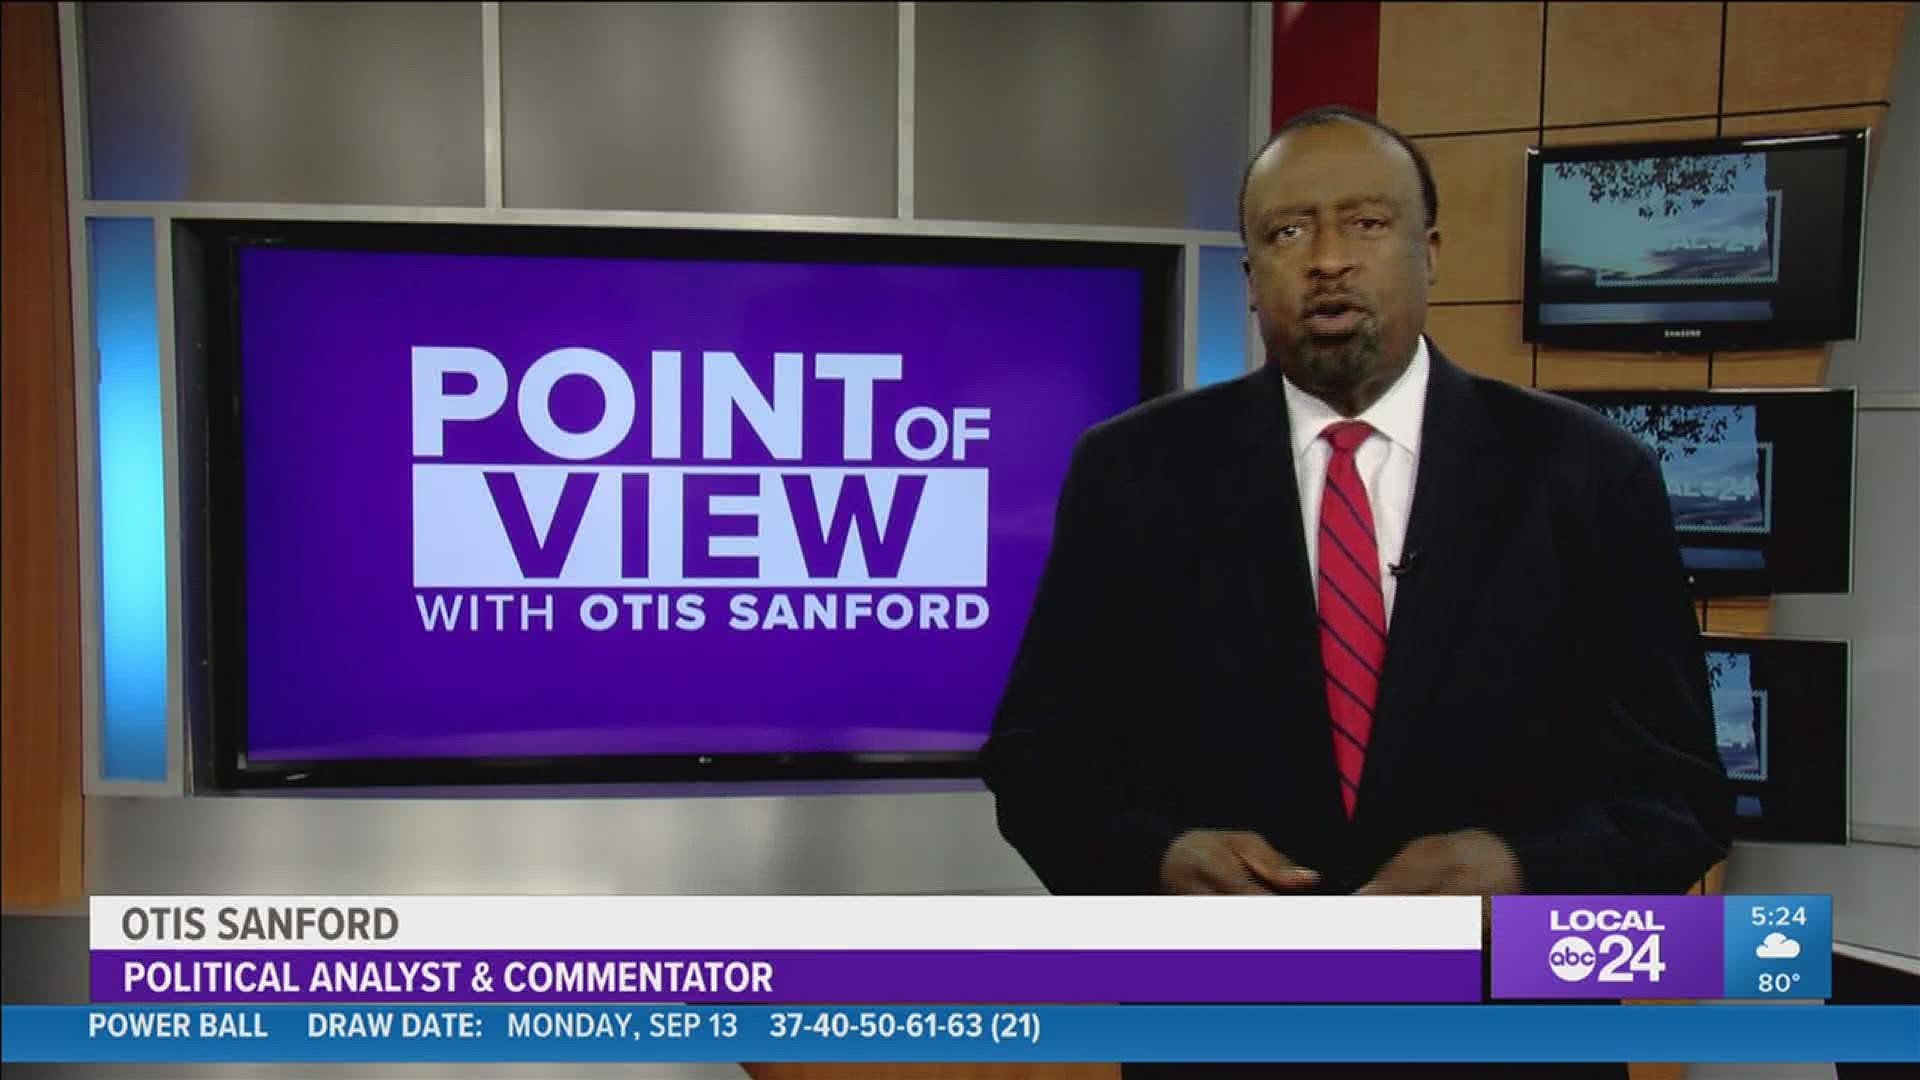 Political analyst and commentator Otis Sanford shared his point of view on the latest battles over abortion.